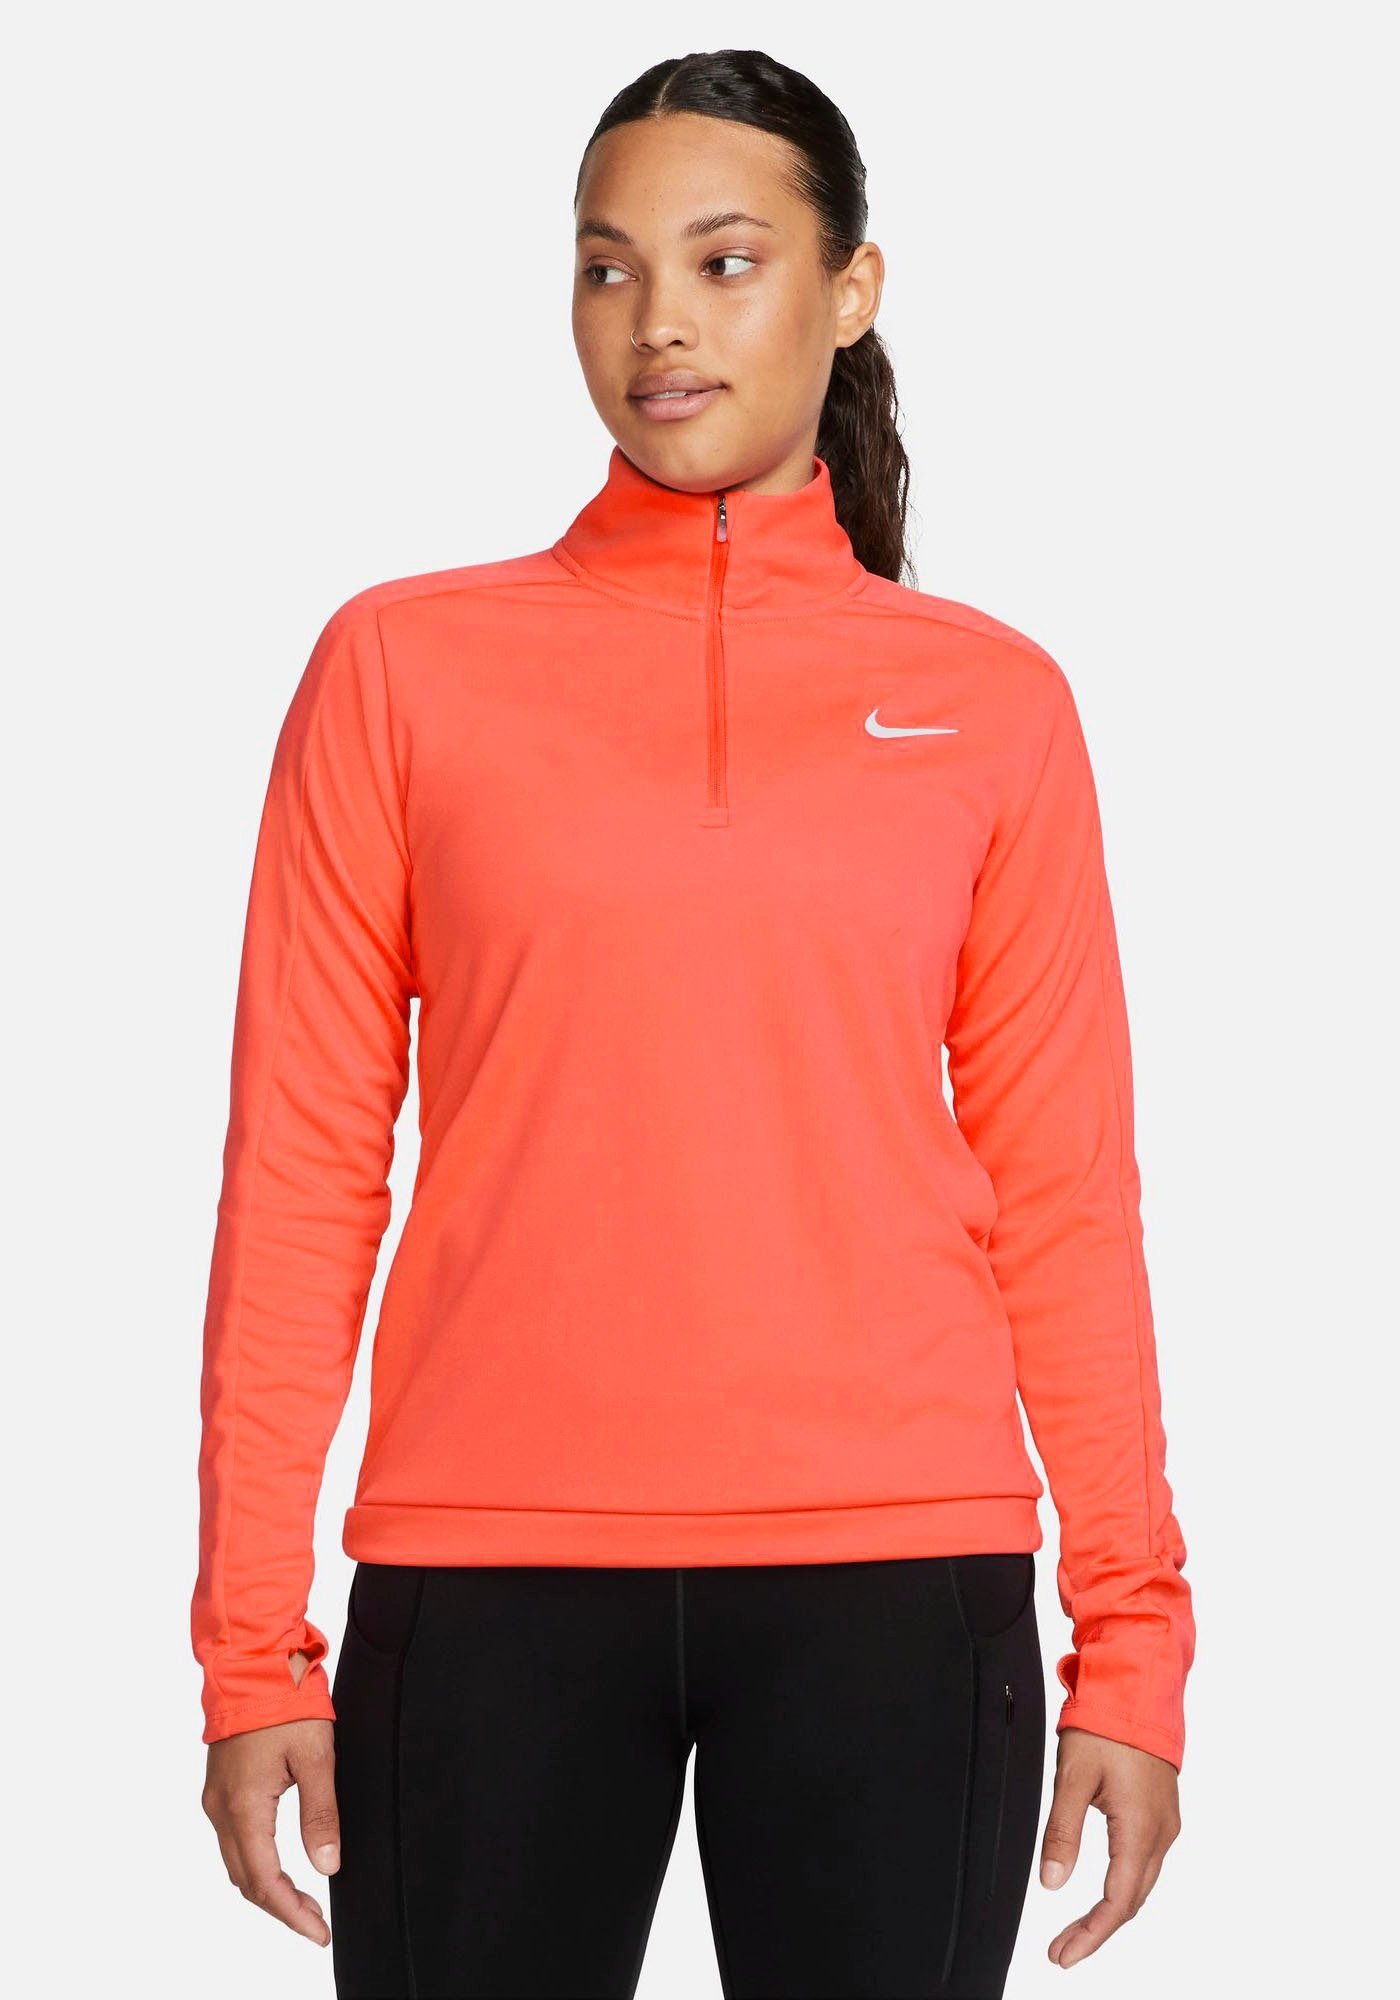 PULLOVER WOMEN'S 1/-ZIP Laufshirt PACER EMBER SILV Nike GLOW/REFLECTIVE DRI-FIT